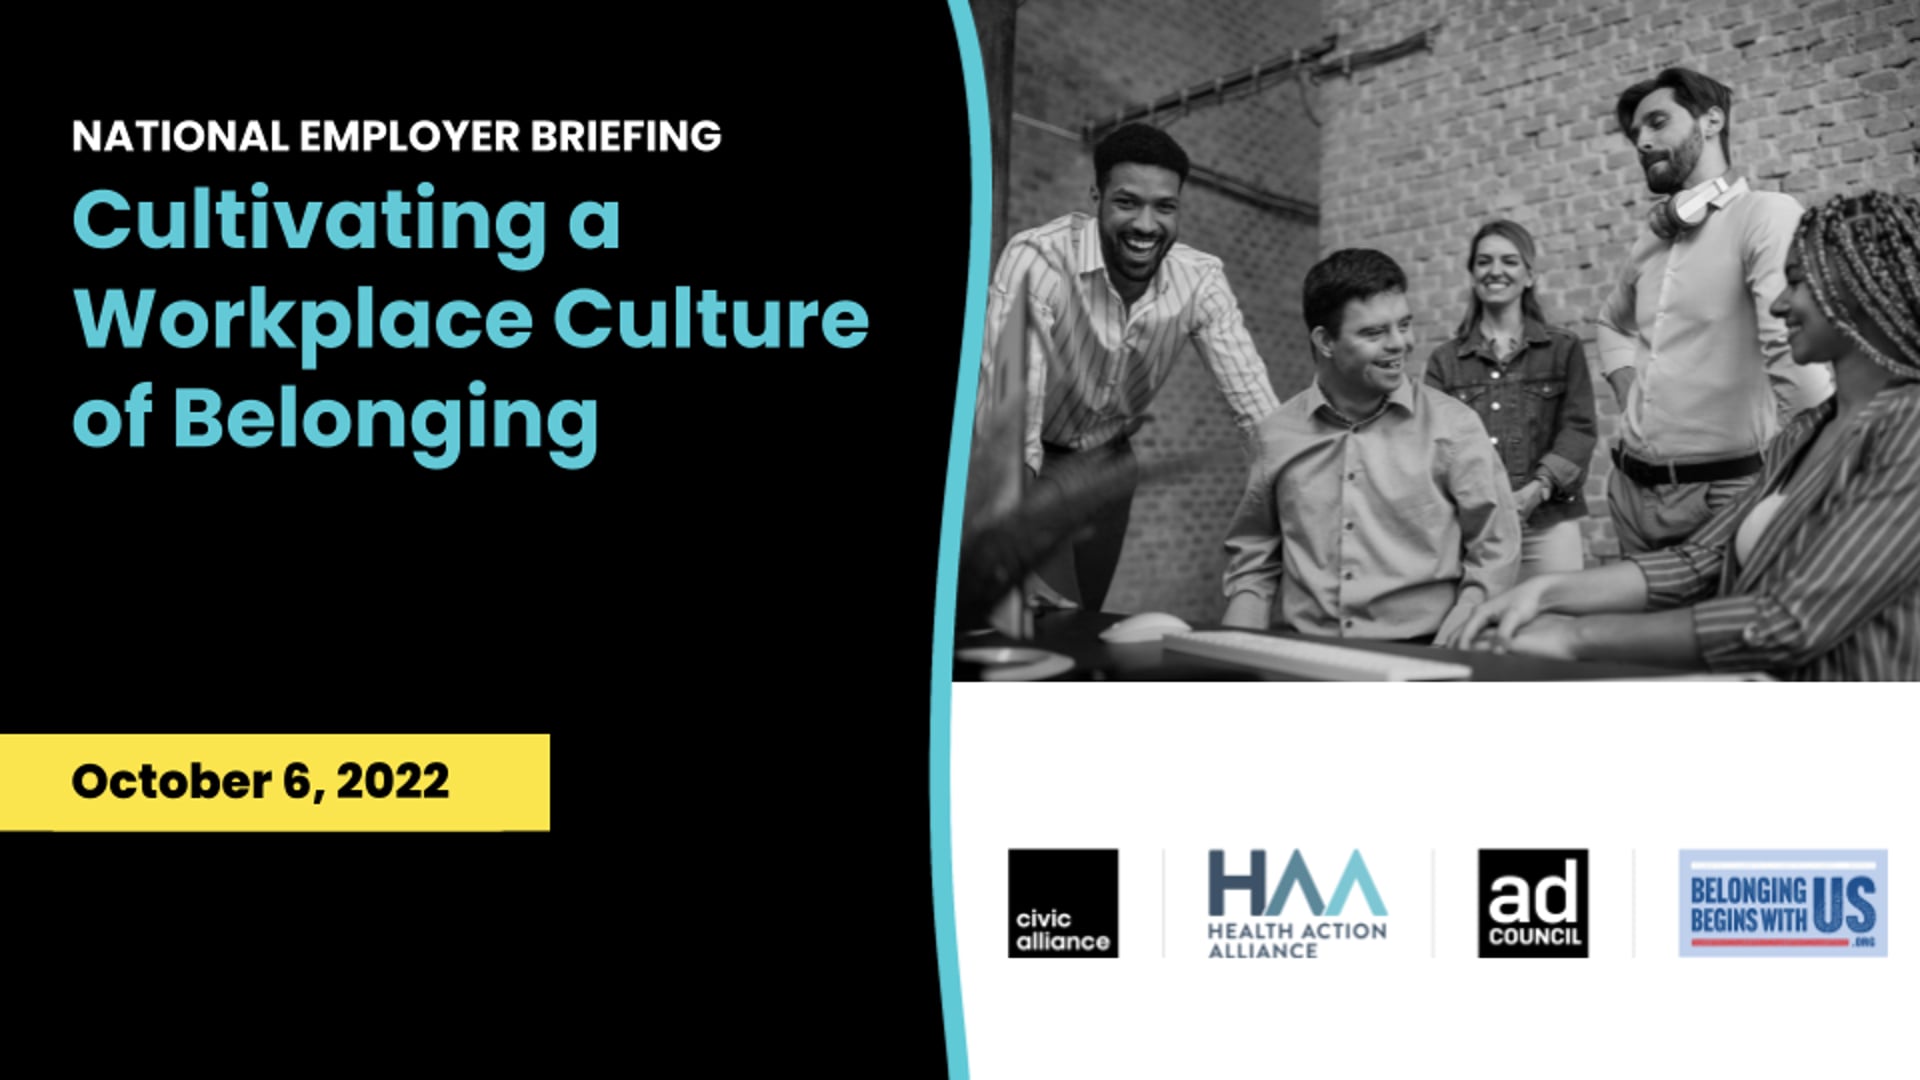 National Employer Briefing: Cultivating a Workplace Culture of Belonging